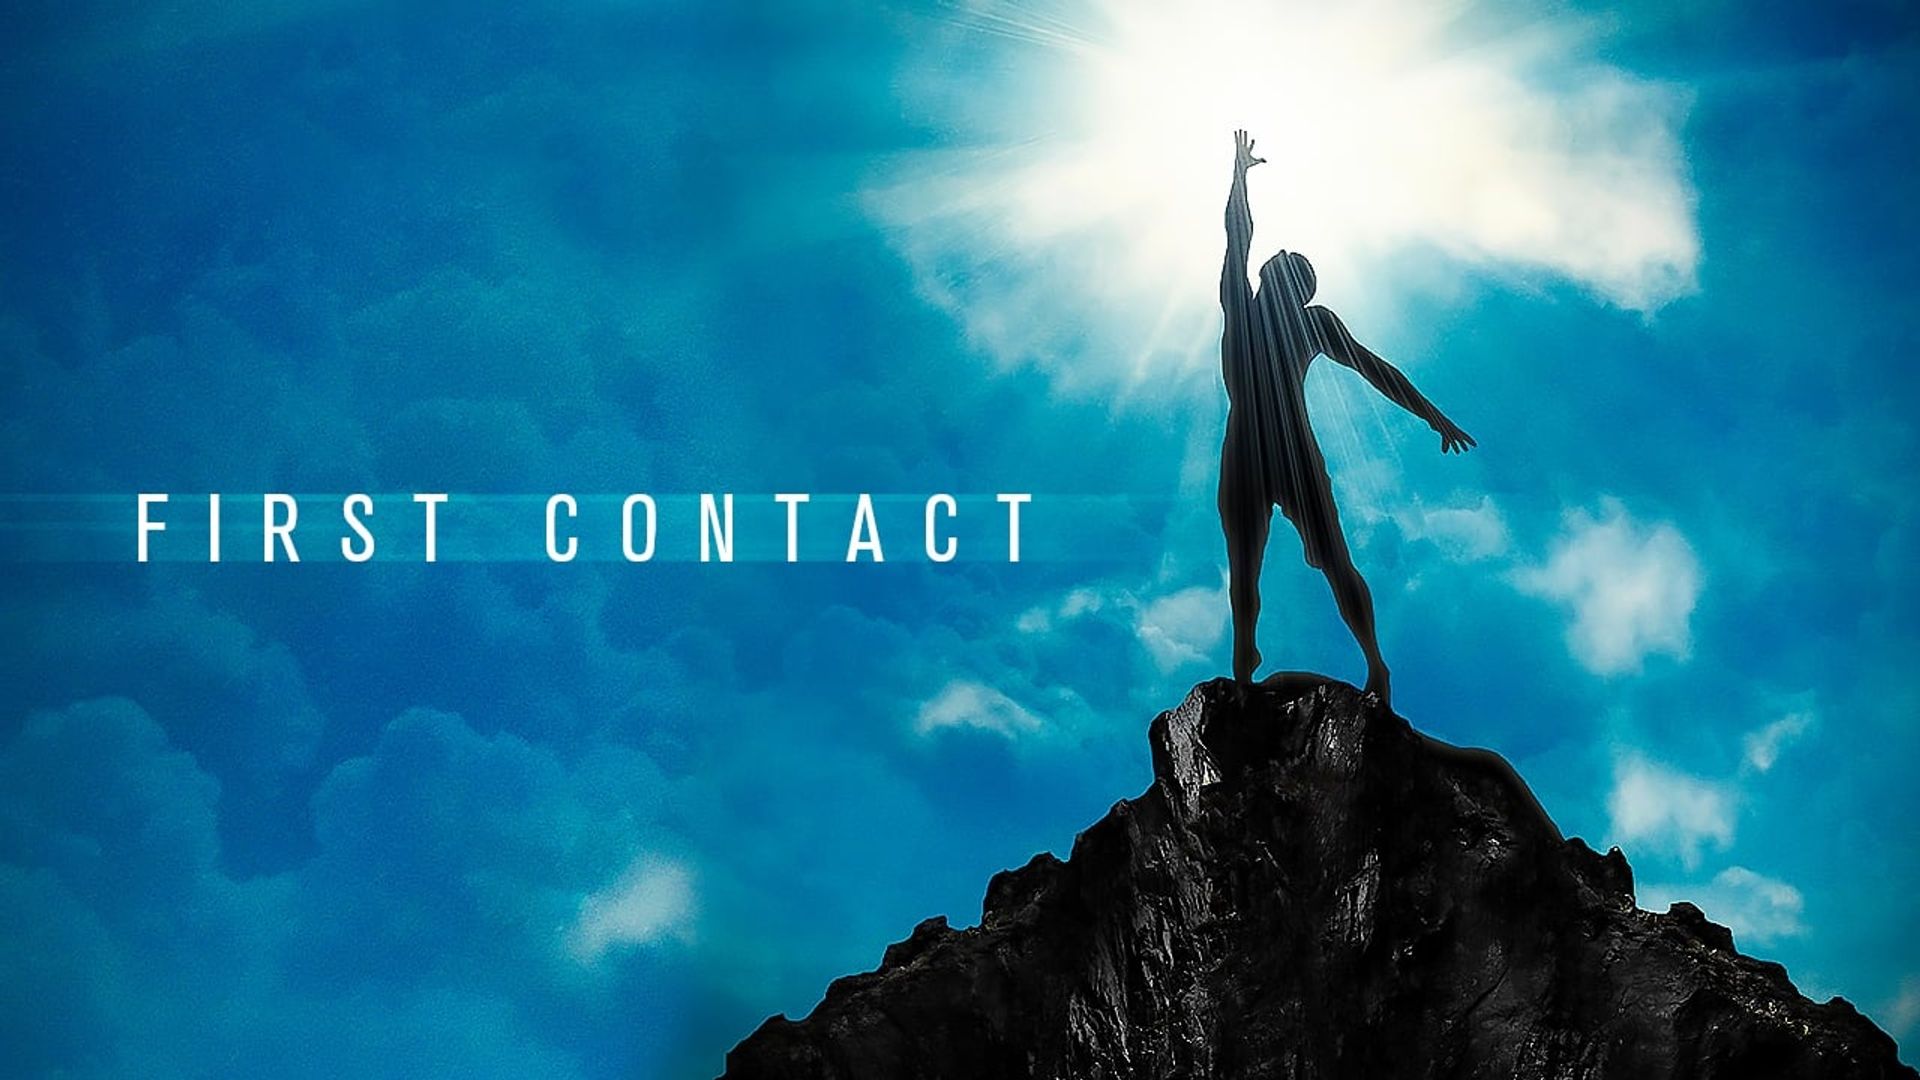 First Contact background